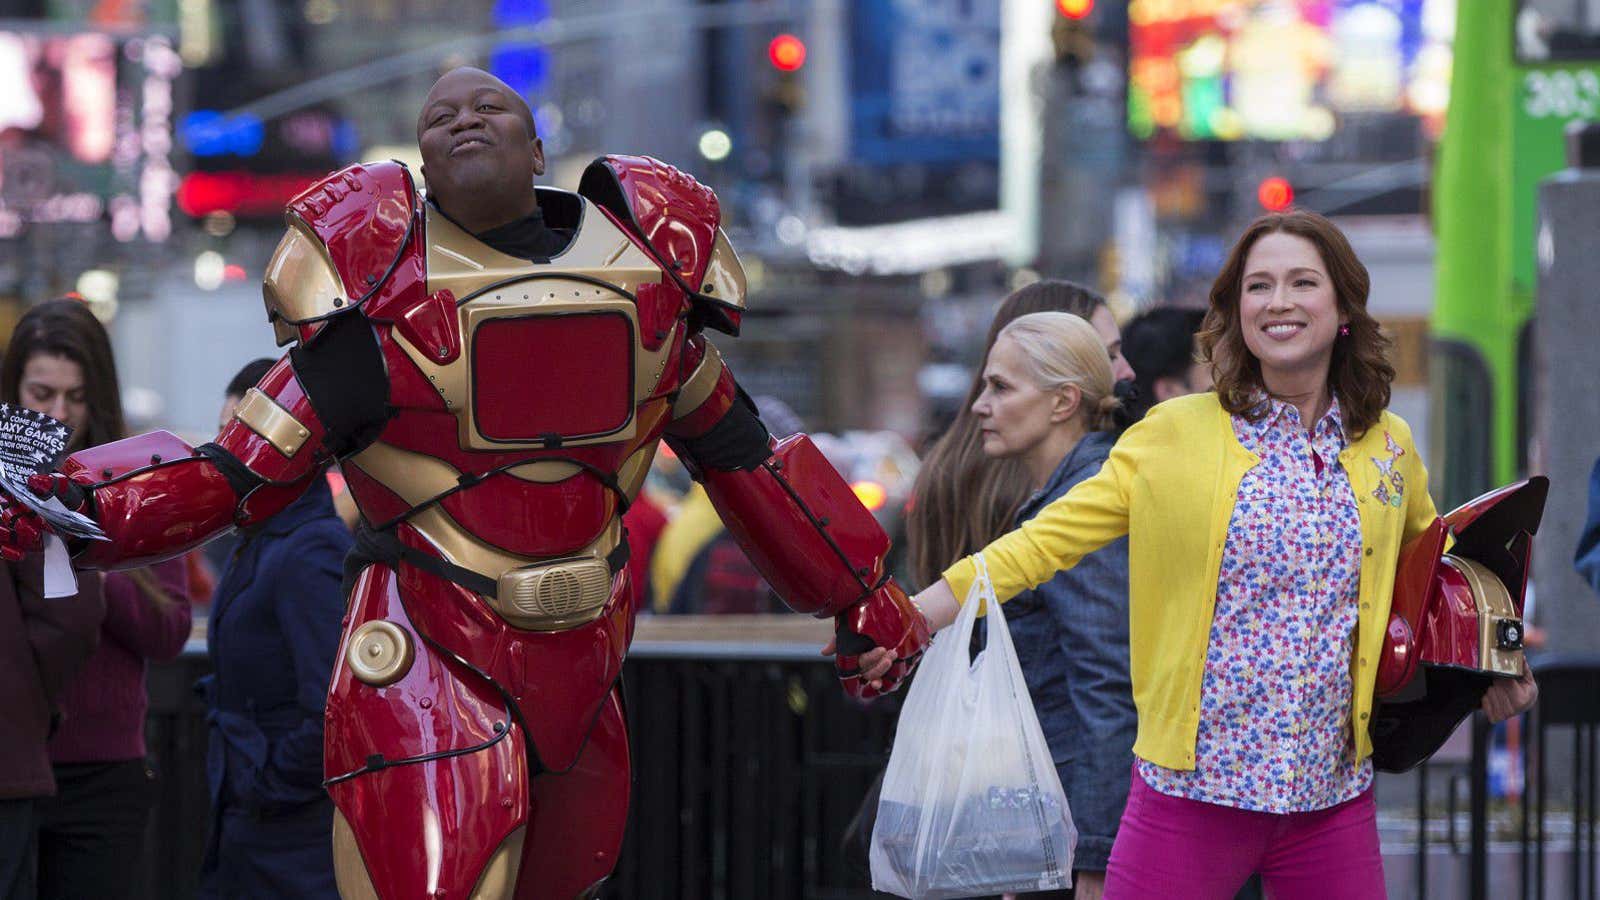 Is Netflix as unbreakable as Kimmy Schmidt and Titus Andromedon?